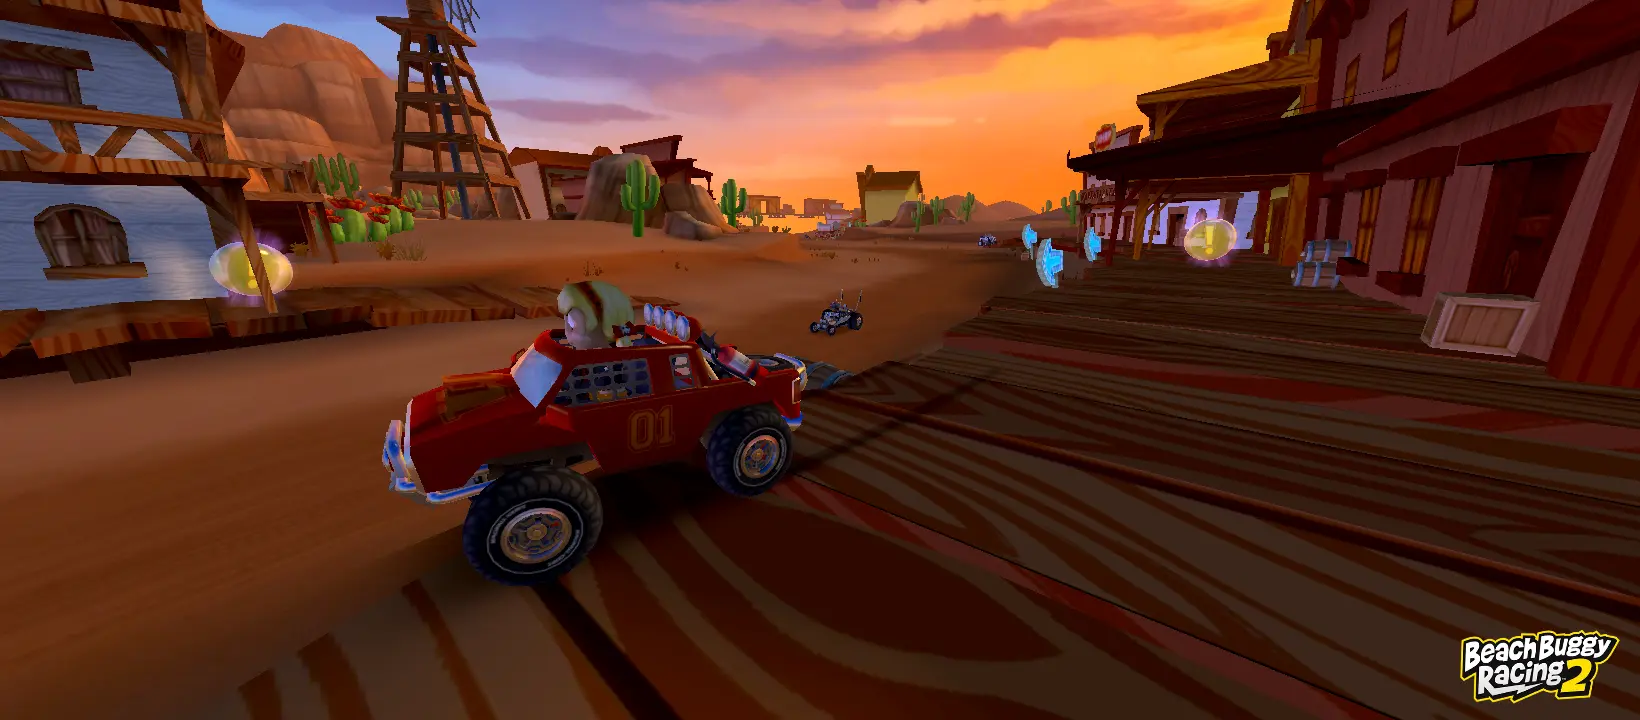 How to choose the best vehicles in beach buggy racing 2?